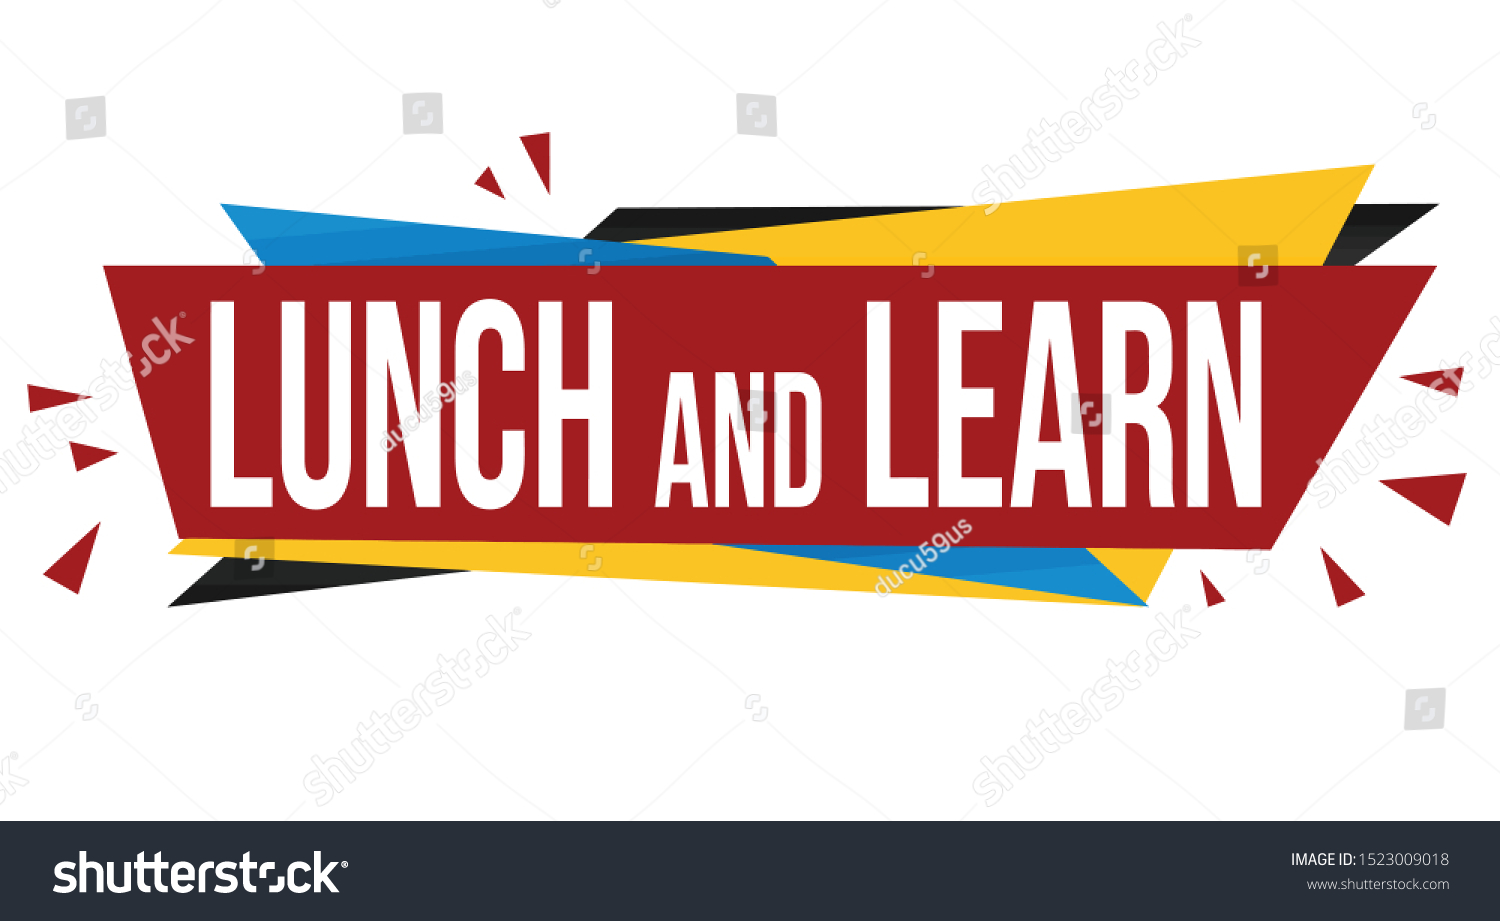 Lunch and learn banner design on white background, vector illustration